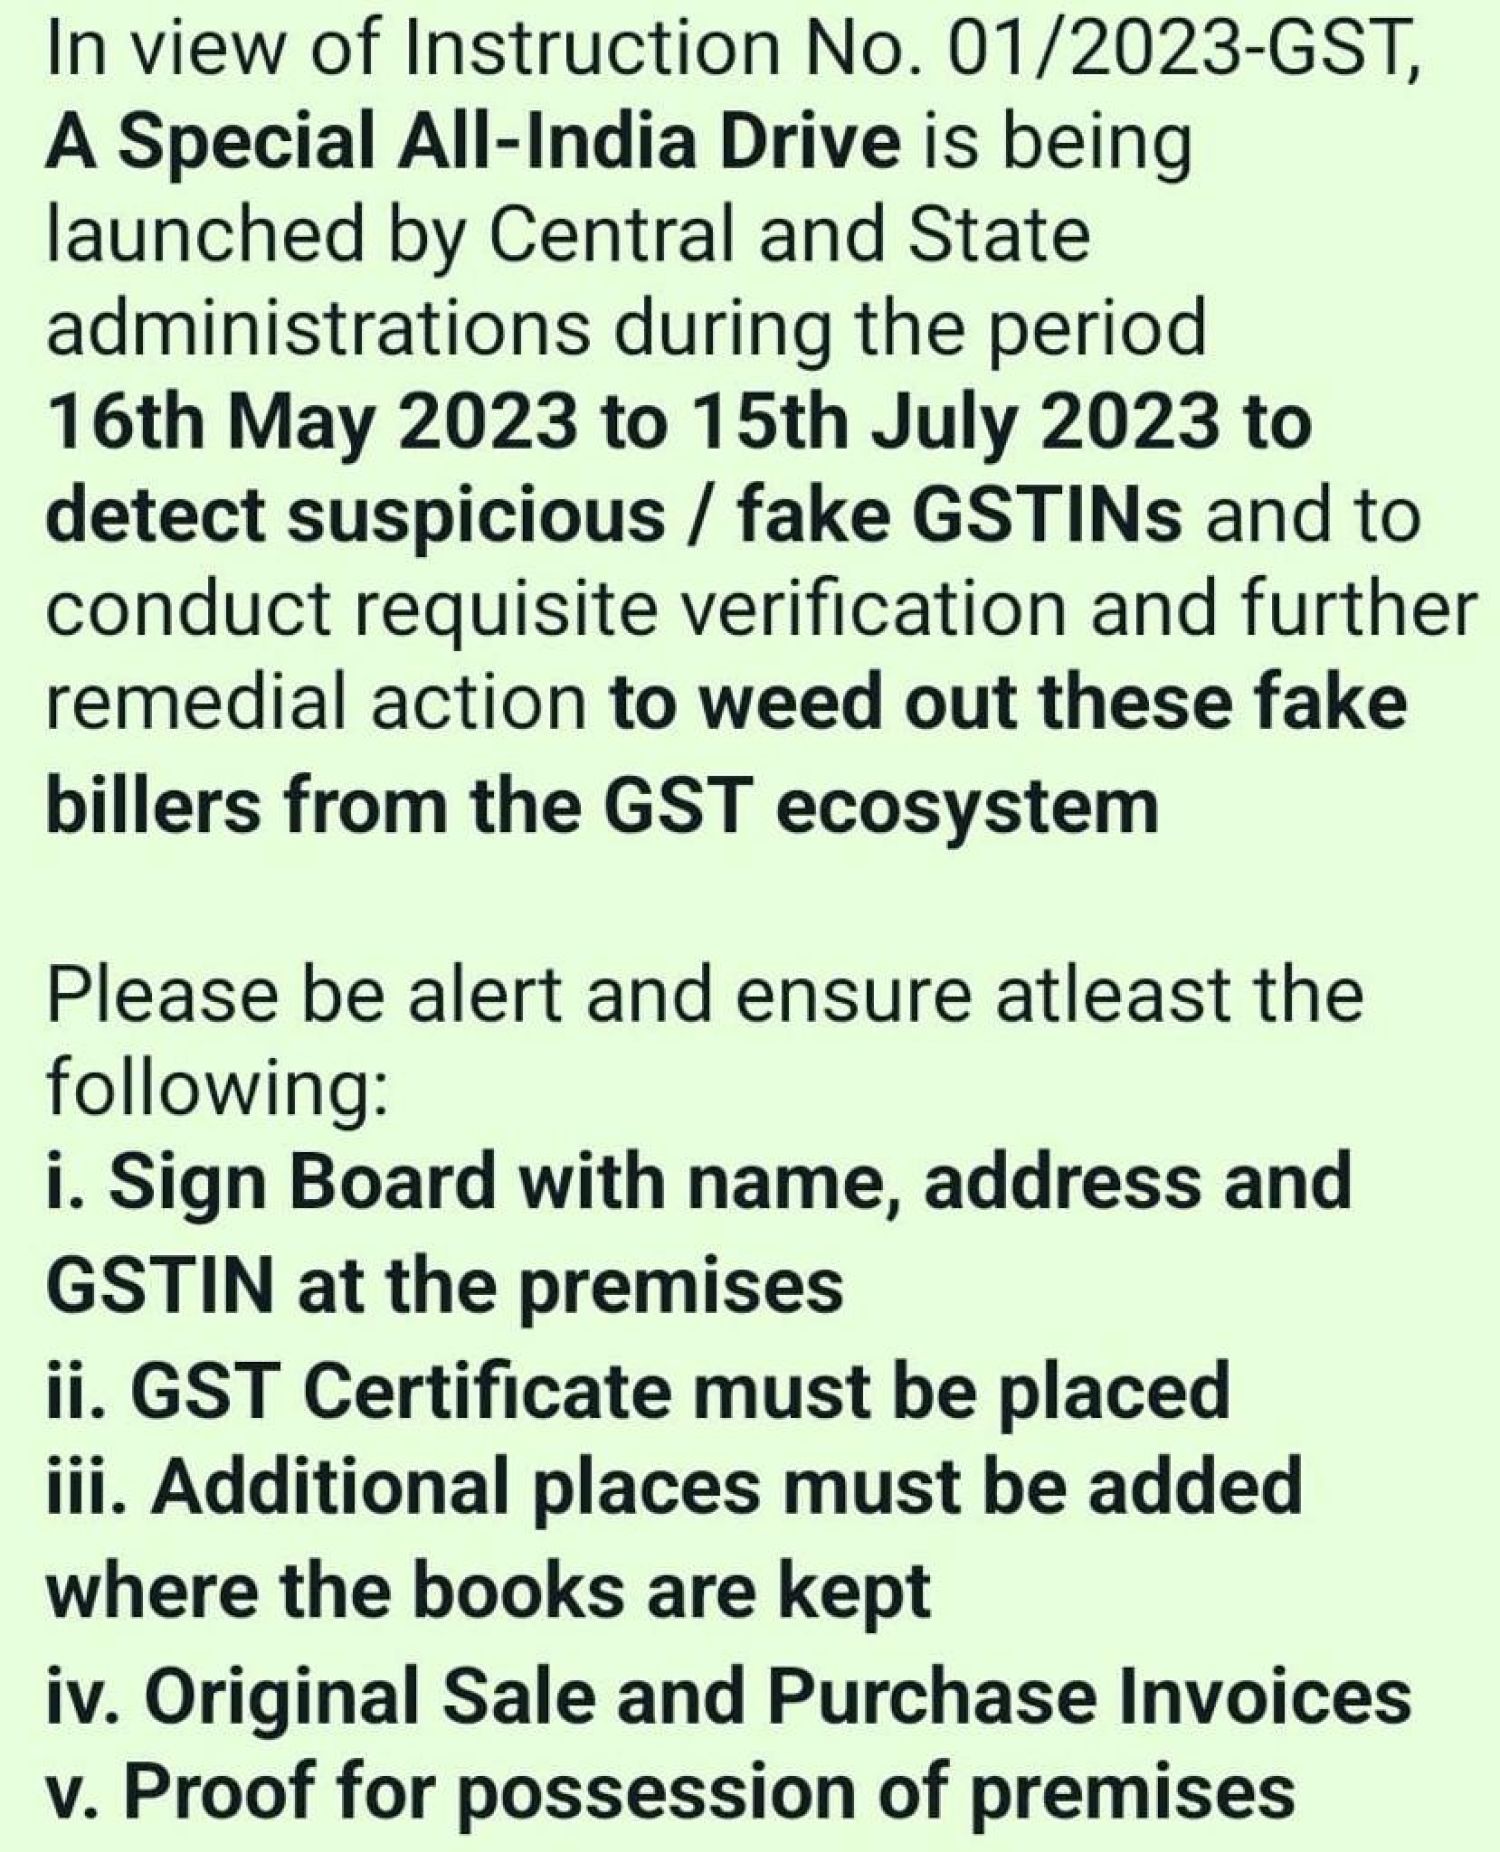 GST Inspector visit at Business Premises of dealers from 16th May to 15th July 2023